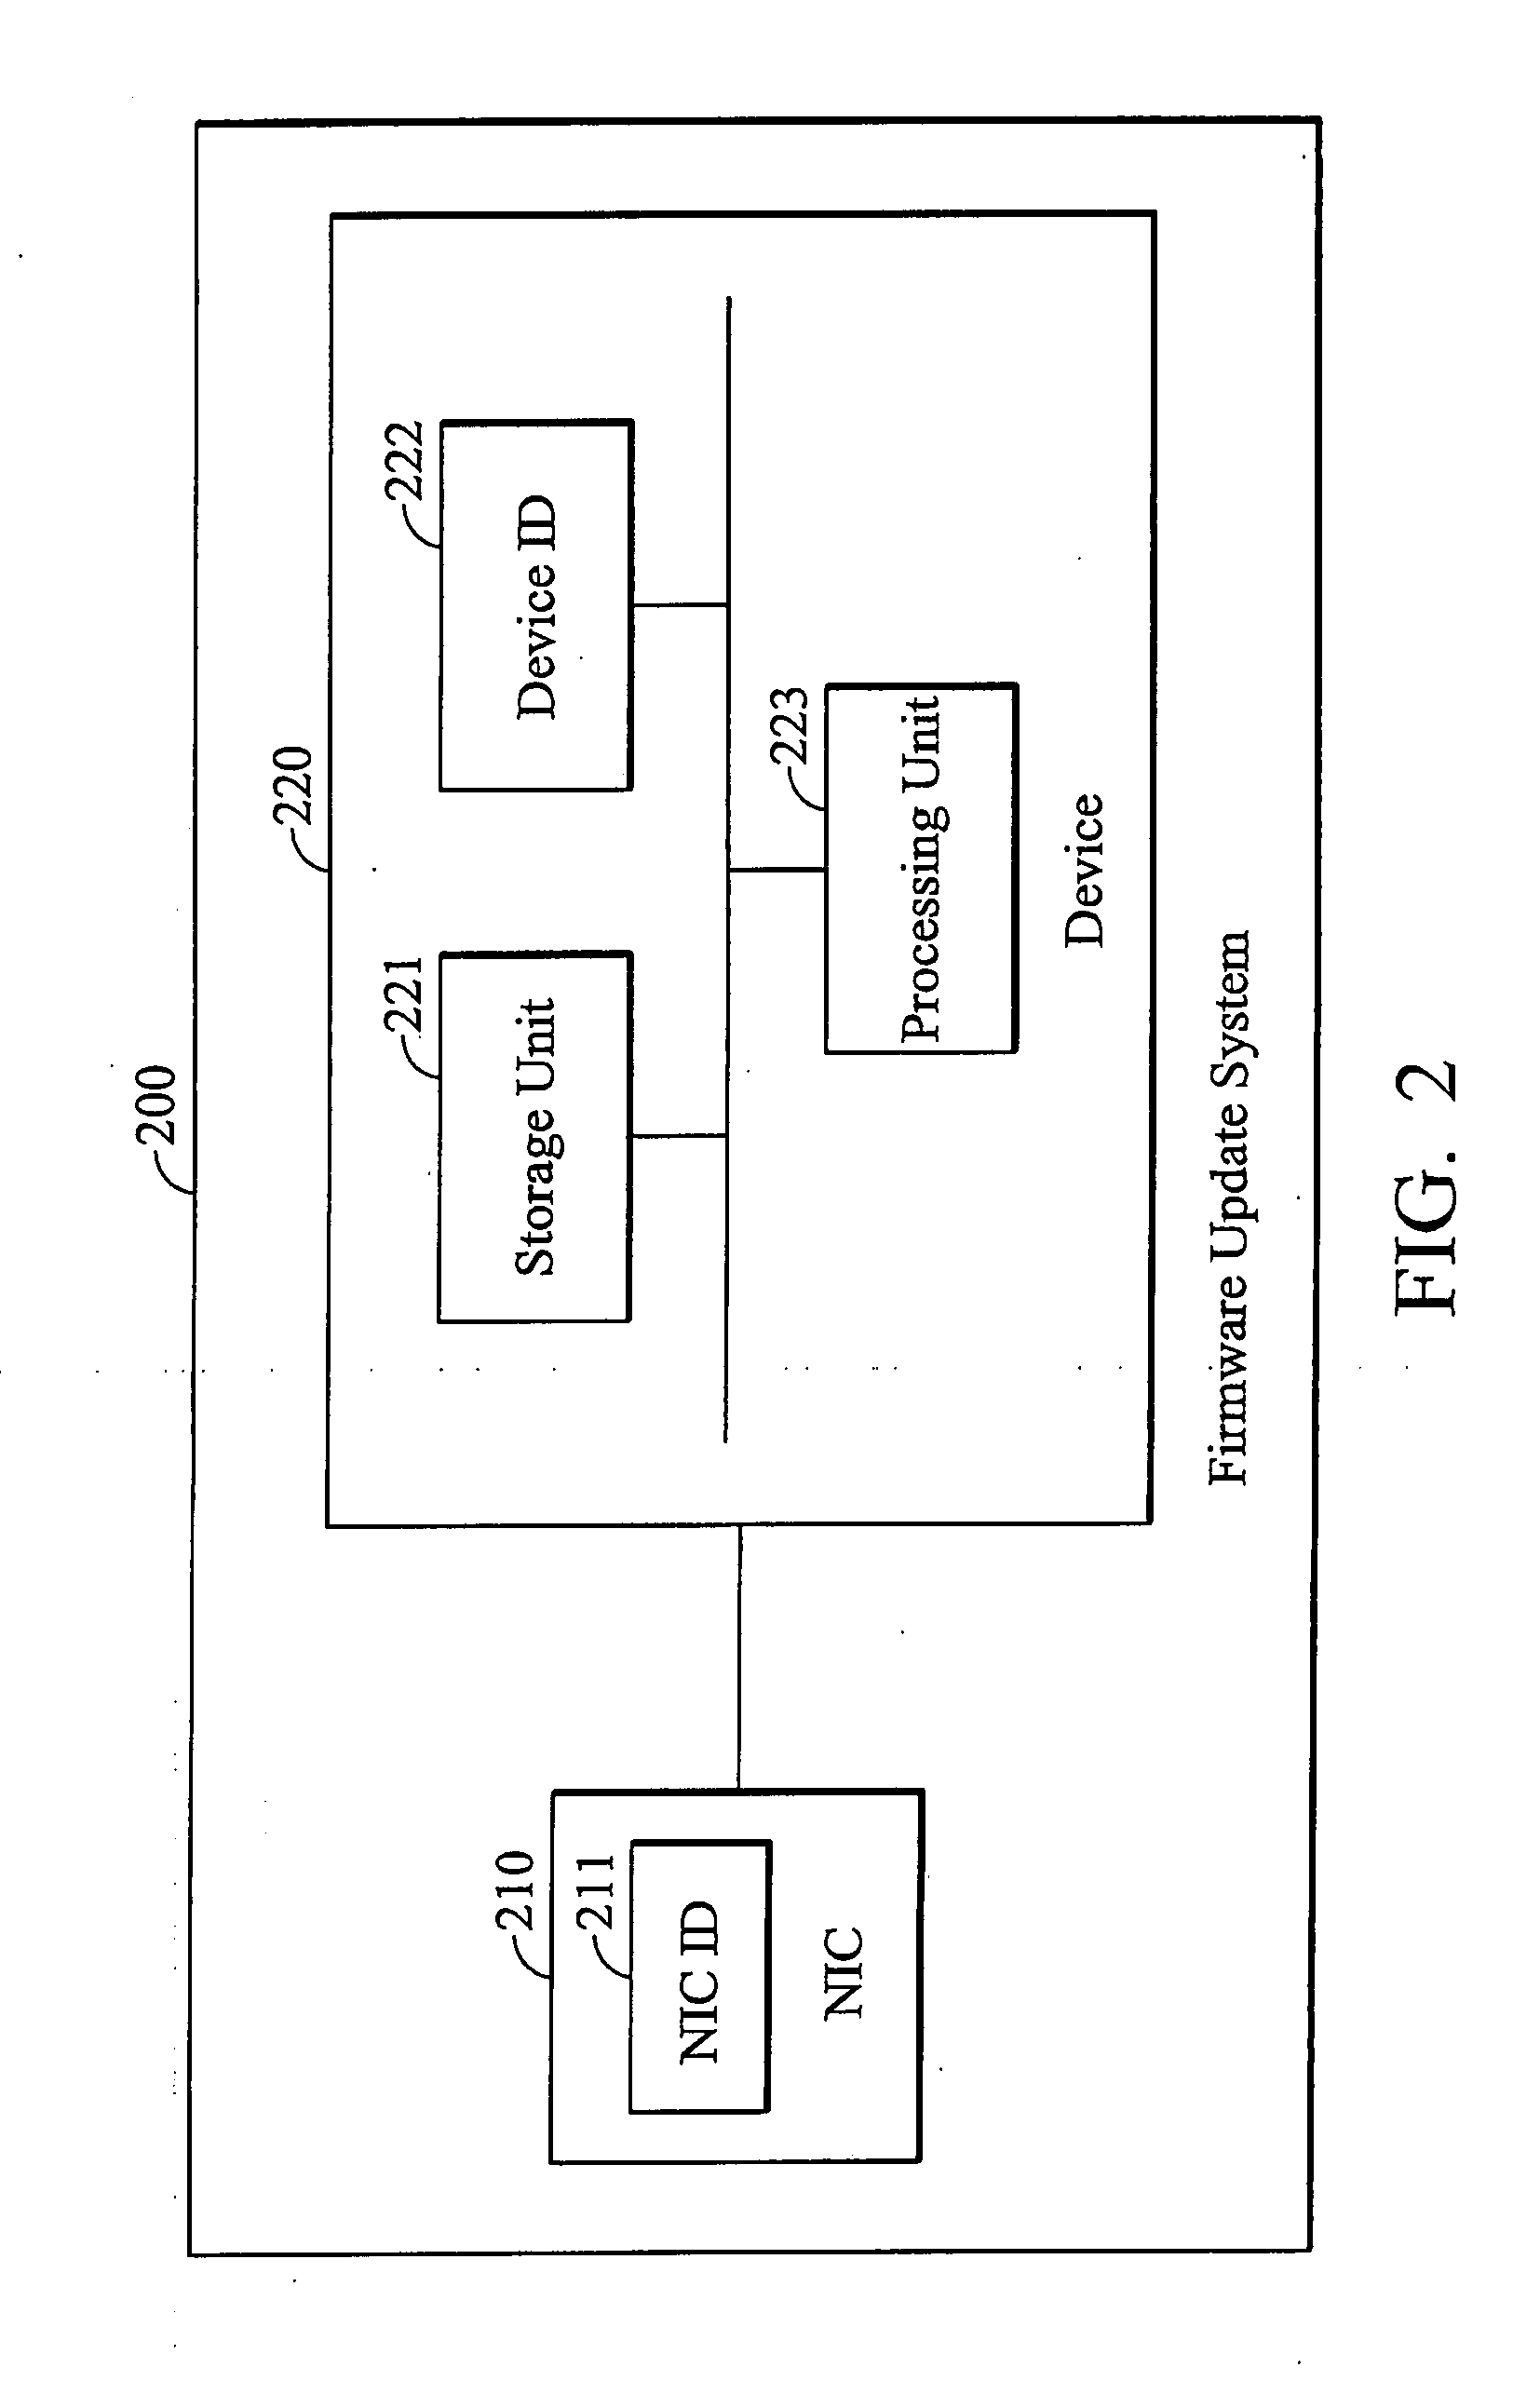 Firmware update method and system using the same